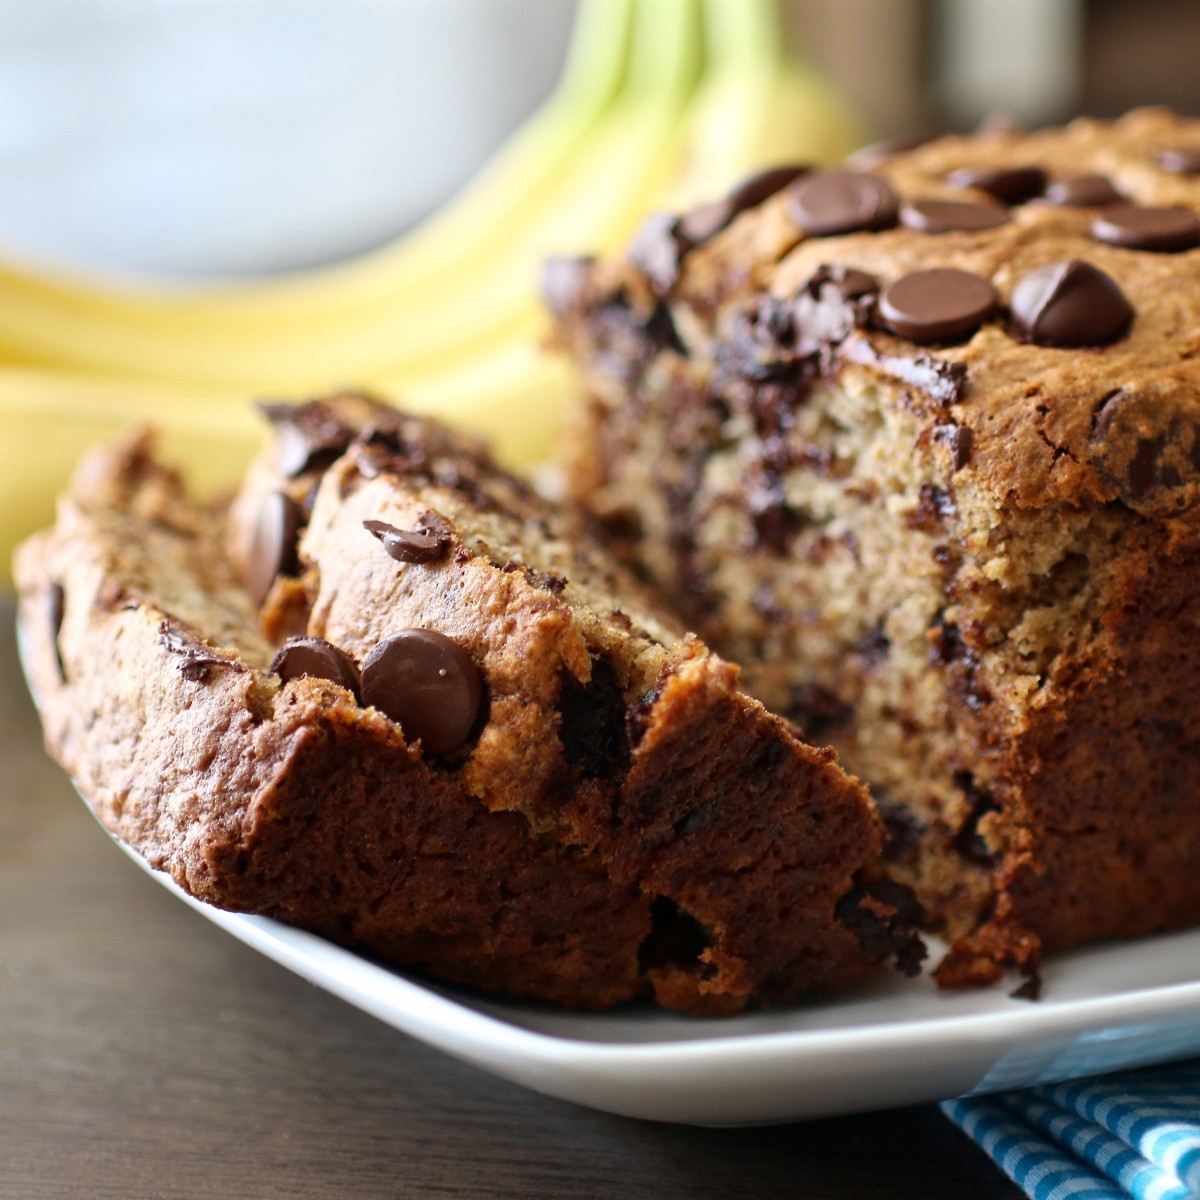 Learn How to Make Chocolate Banana Bread From Scratch